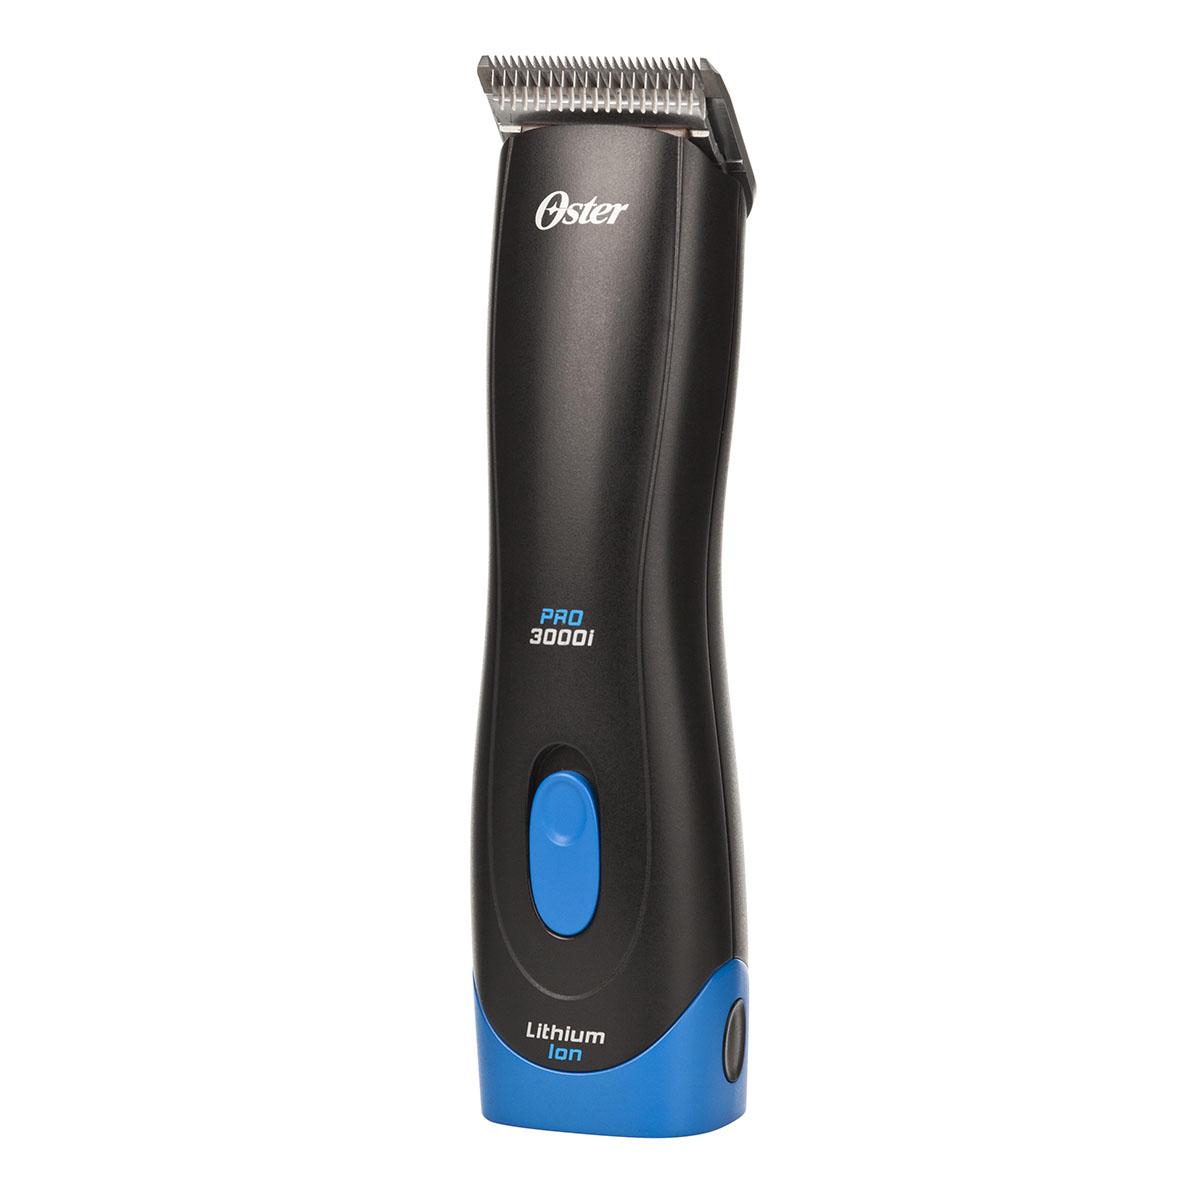 oster cordless clipper